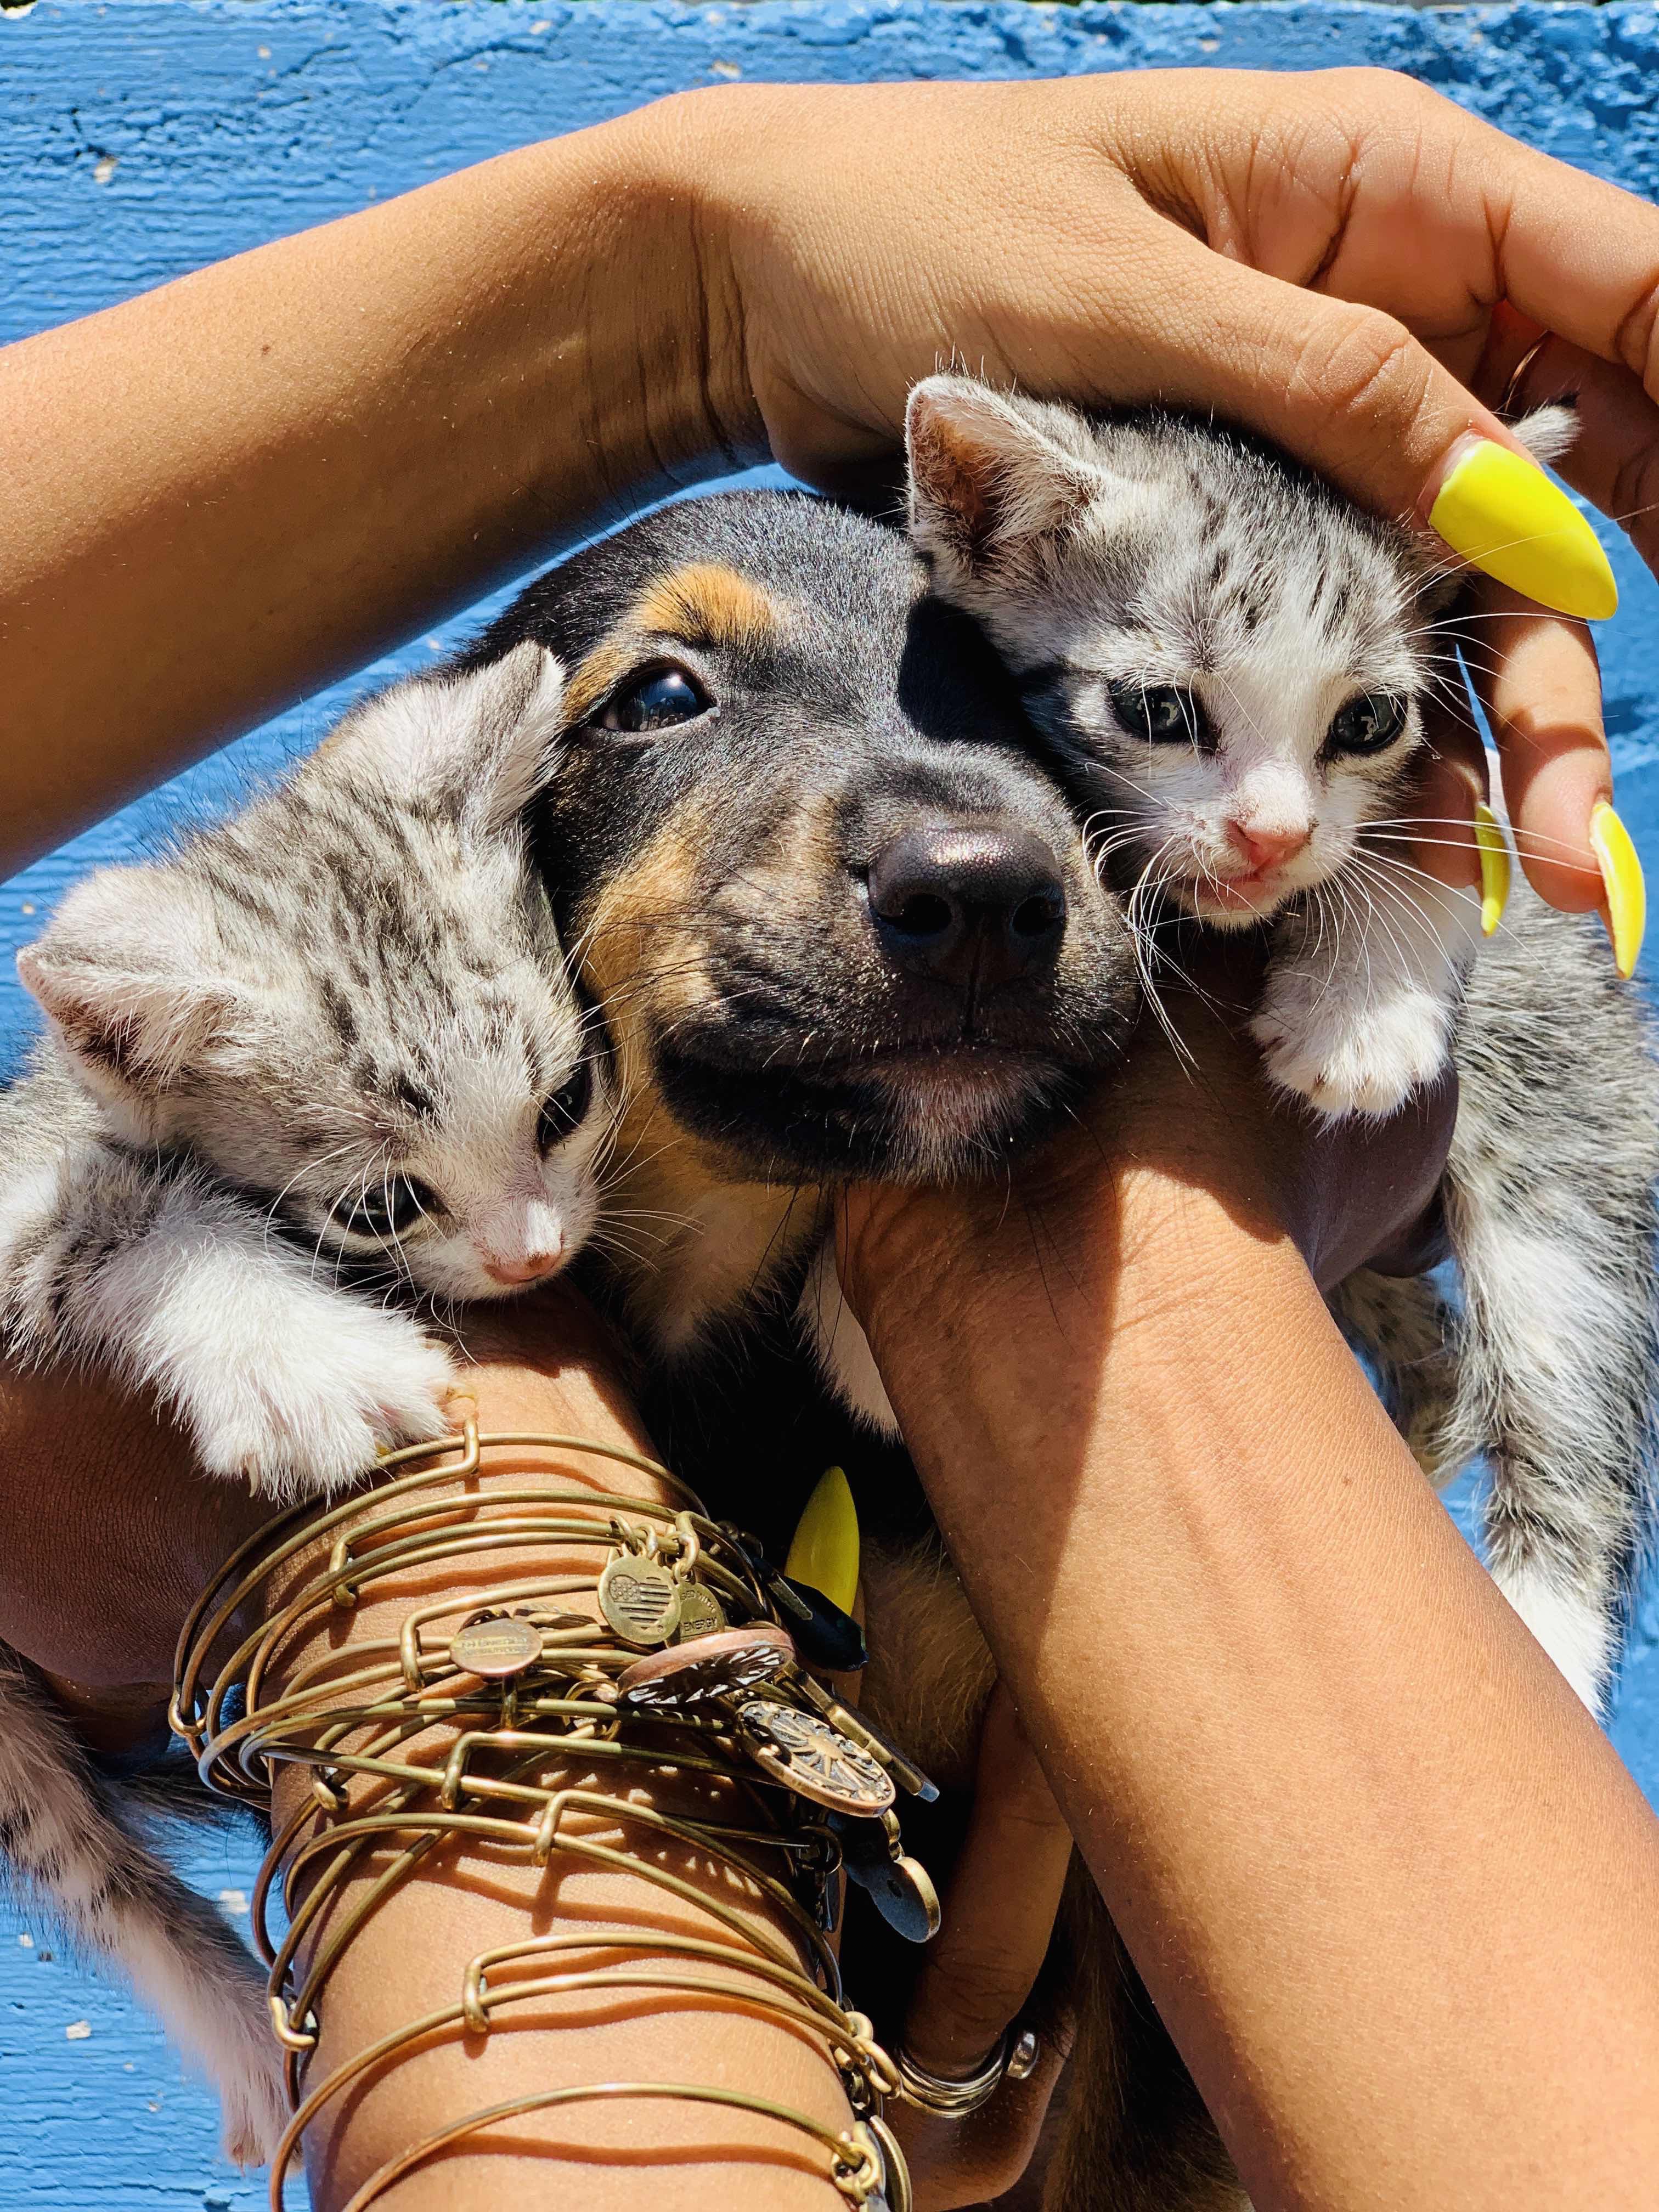 Two tabby kittens with a black puppy